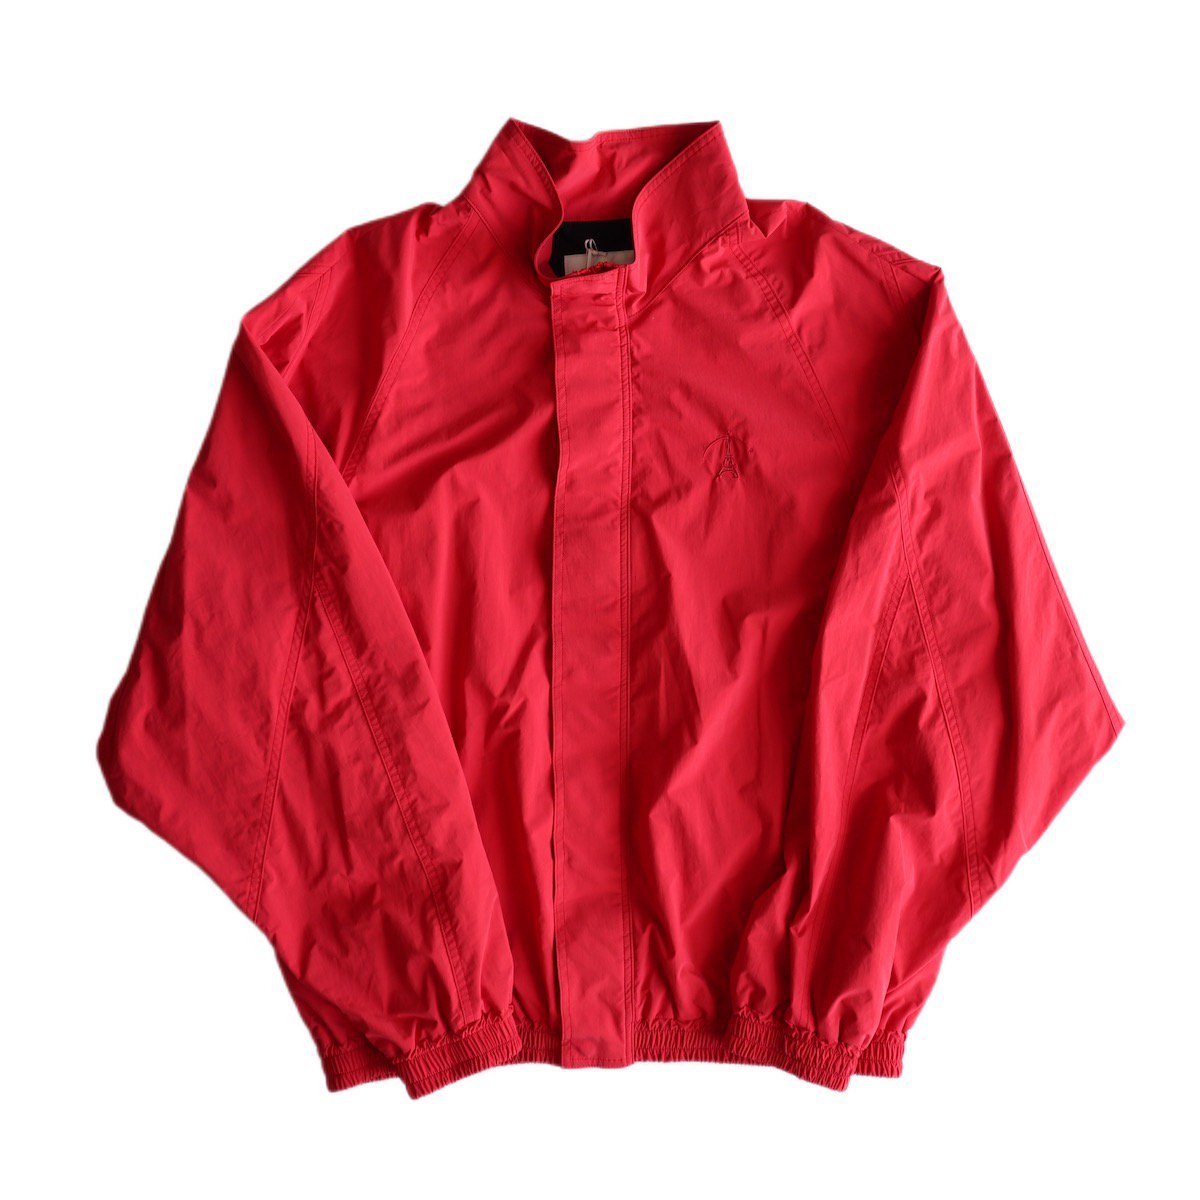 doublet / CHAOS EMBROIDERY TRACK JACKET-doublet(ダブレット)の通販EQUAL